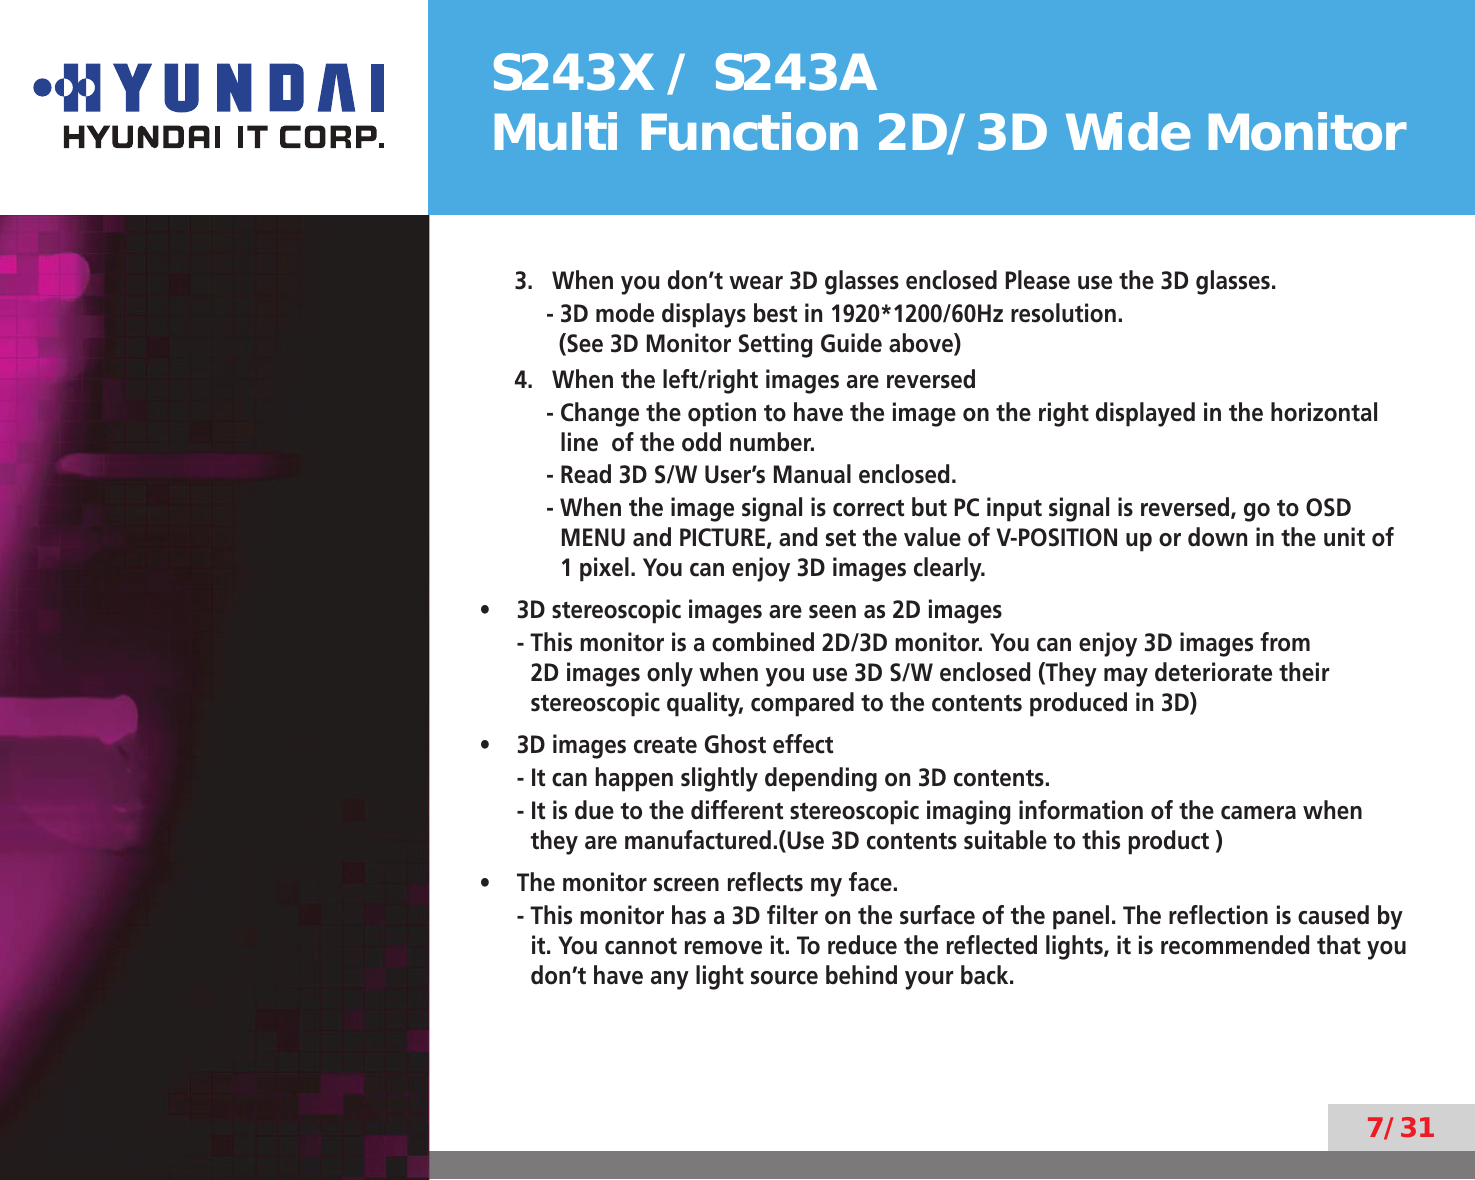 S243X / S243AMulti Function 2D/3D Wide Monitor7/313.  When you don’t wear 3D glasses enclosed Please use the 3D glasses.- 3D mode displays best in 1920*1200/60Hz resolution.  (See 3D Monitor Setting Guide above)4.  When the left/right images are reversed-  Change the option to have the image on the right displayed in the horizontal line  of the odd number.- Read 3D S/W User’s Manual enclosed.-  When the image signal is correct but PC input signal is reversed, go to OSD MENU and PICTURE, and set the value of V-POSITION up or down in the unit of 1 pixel. You can enjoy 3D images clearly.3D stereoscopic images are seen as 2D images• -  This monitor is a combined 2D/3D monitor. You can enjoy 3D images from 2D images only when you use 3D S/W enclosed (They may deteriorate their stereoscopic quality, compared to the contents produced in 3D)3D images create Ghost effect• -  It can happen slightly depending on 3D contents.-  It is due to the different stereoscopic imaging information of the camera when they are manufactured.(Use 3D contents suitable to this product )The monitor screen reﬂects my face.• -   This monitor has a 3D ﬁlter on the surface of the panel. The reﬂection is caused by it. You cannot remove it. To reduce the reﬂected lights, it is recommended that you don’t have any light source behind your back.